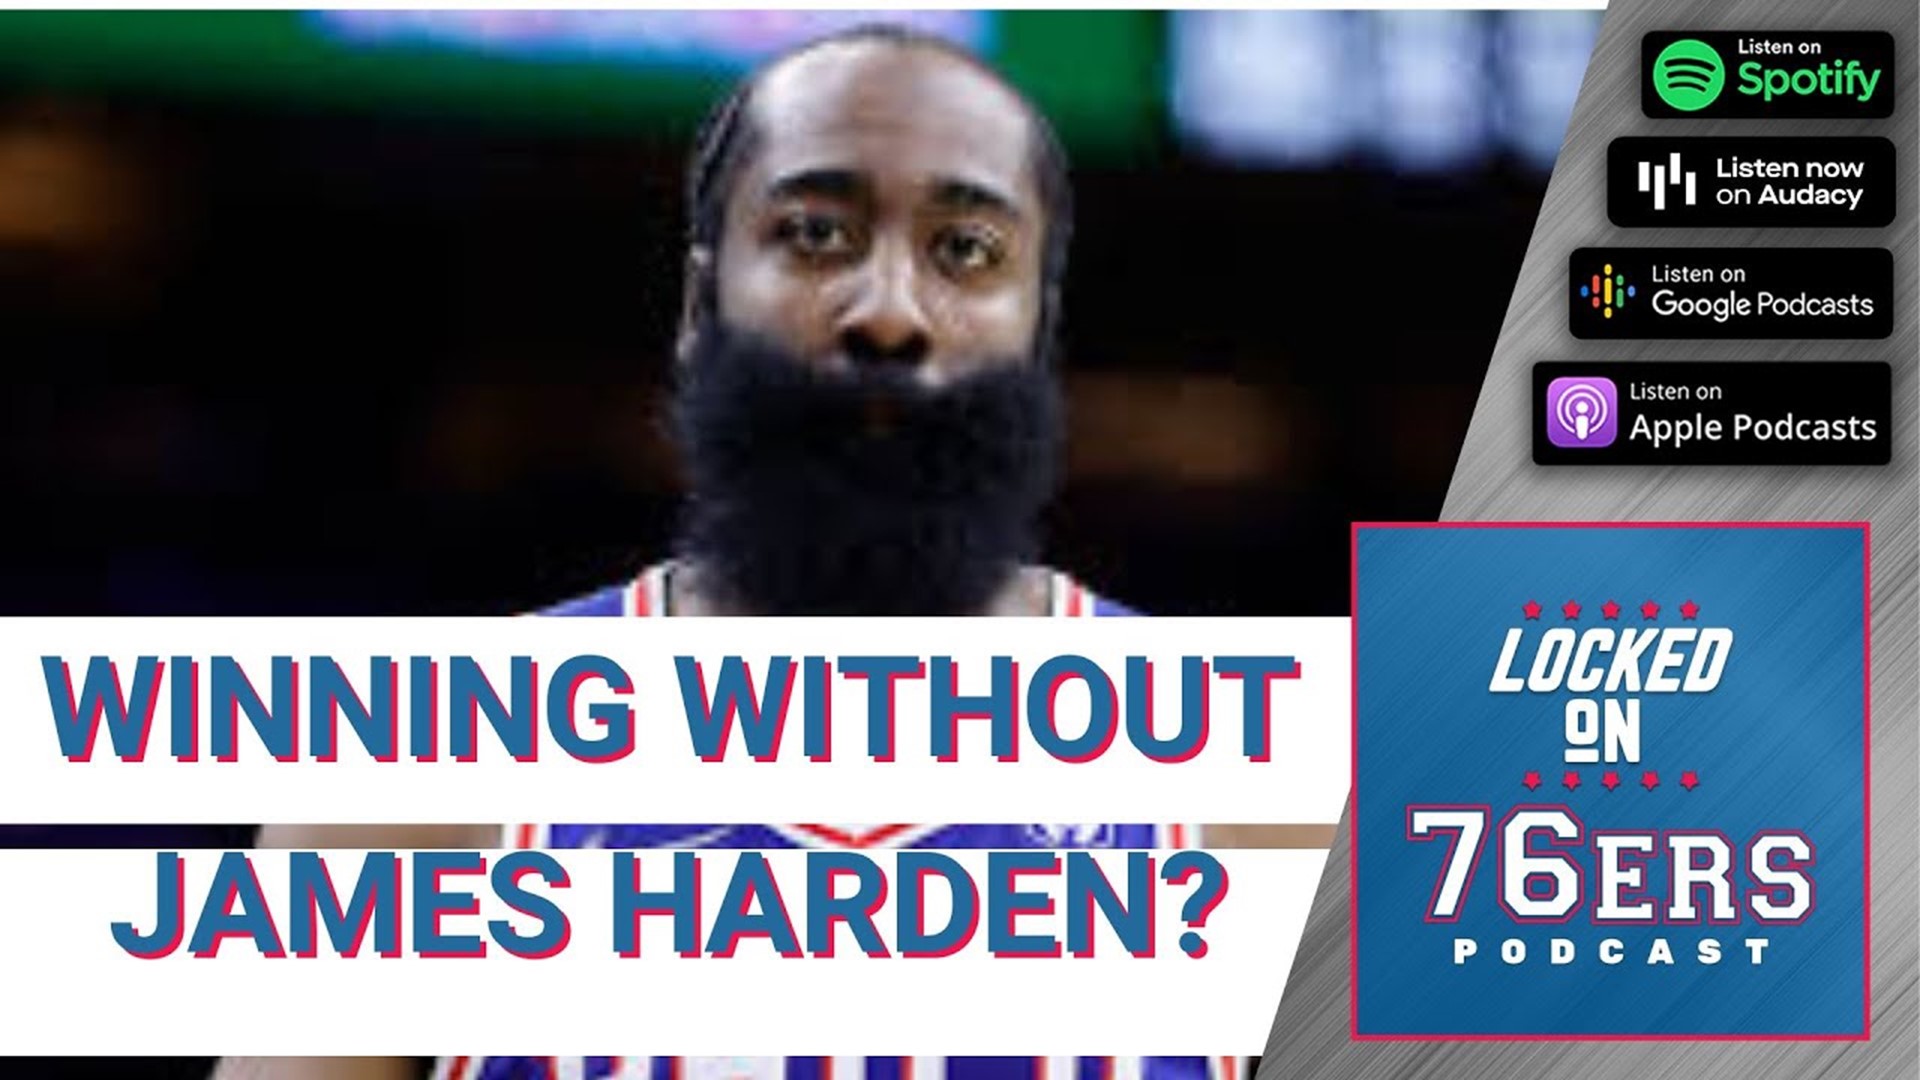 How can the Sixers keep winning without James Harden in the lineup?